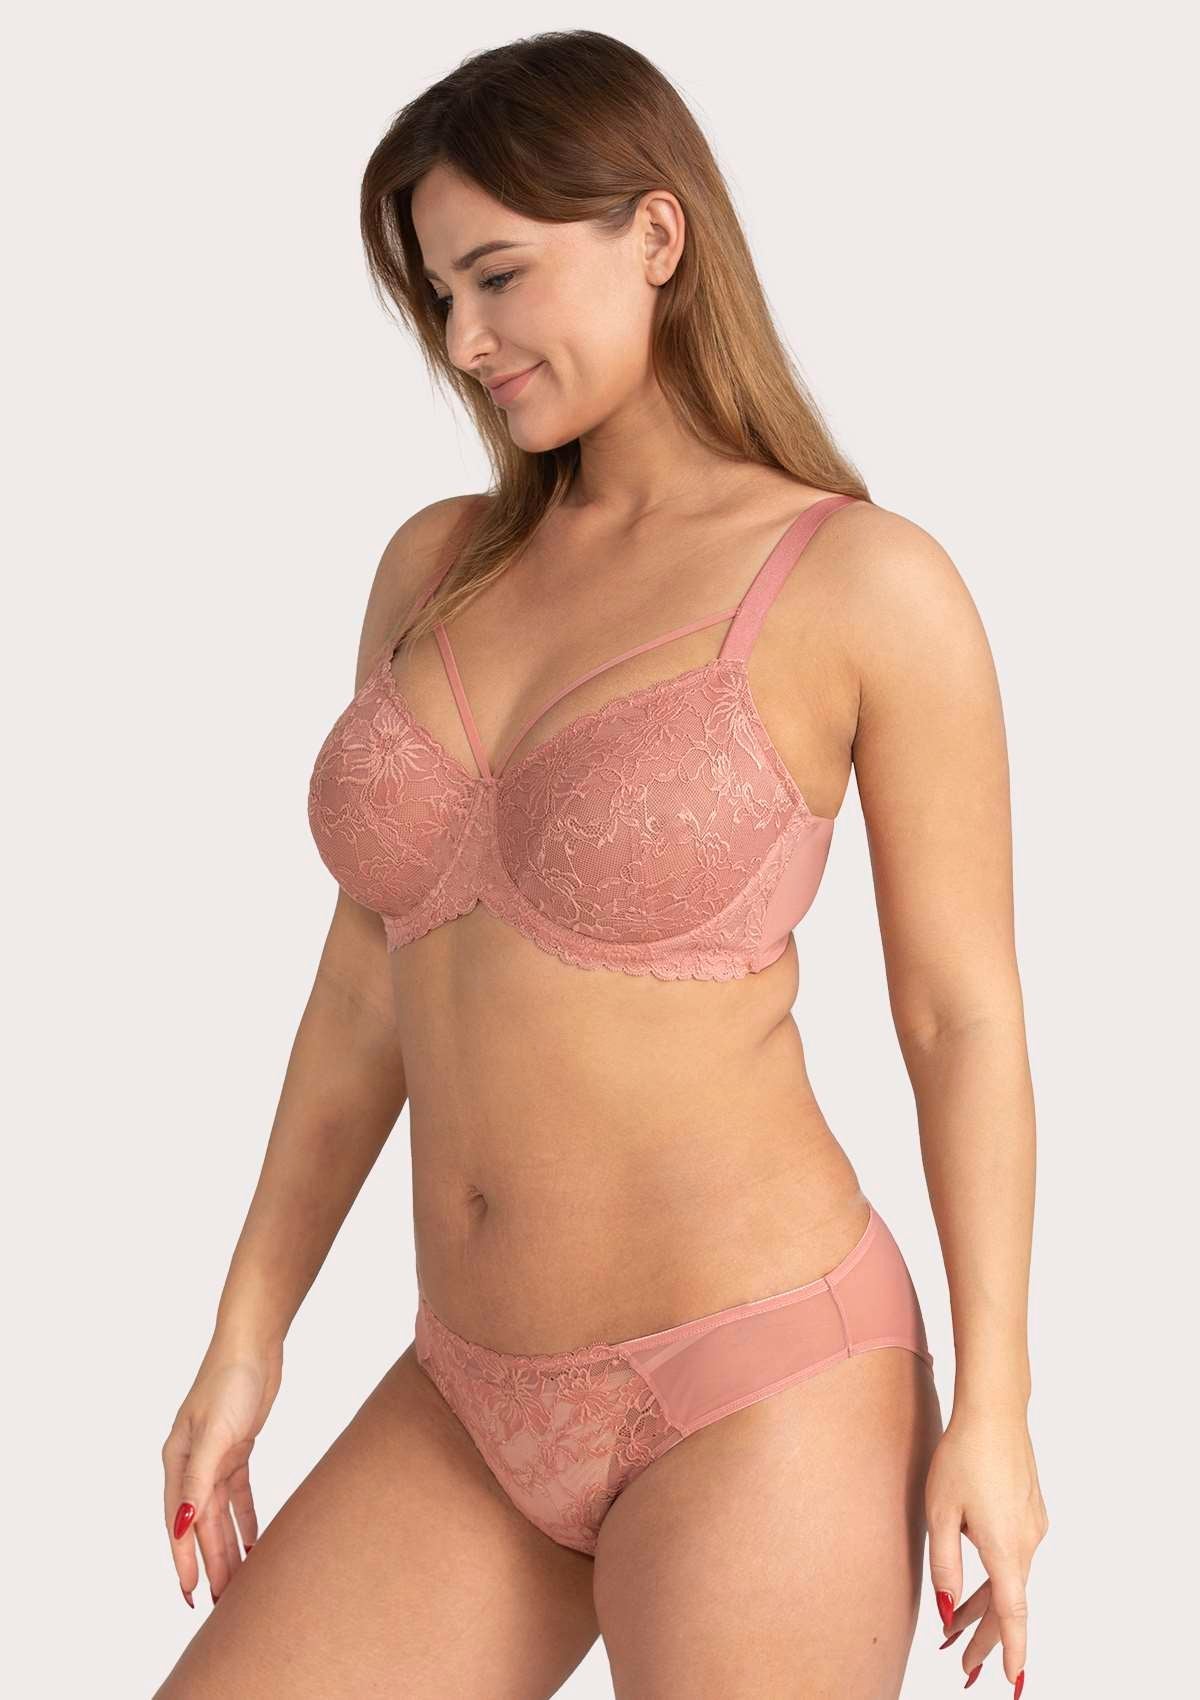 HSIA Pretty In Petals Lace Bra And Panty Sets: Bra For Big Boobs - Light Coral / 40 / DDD/F